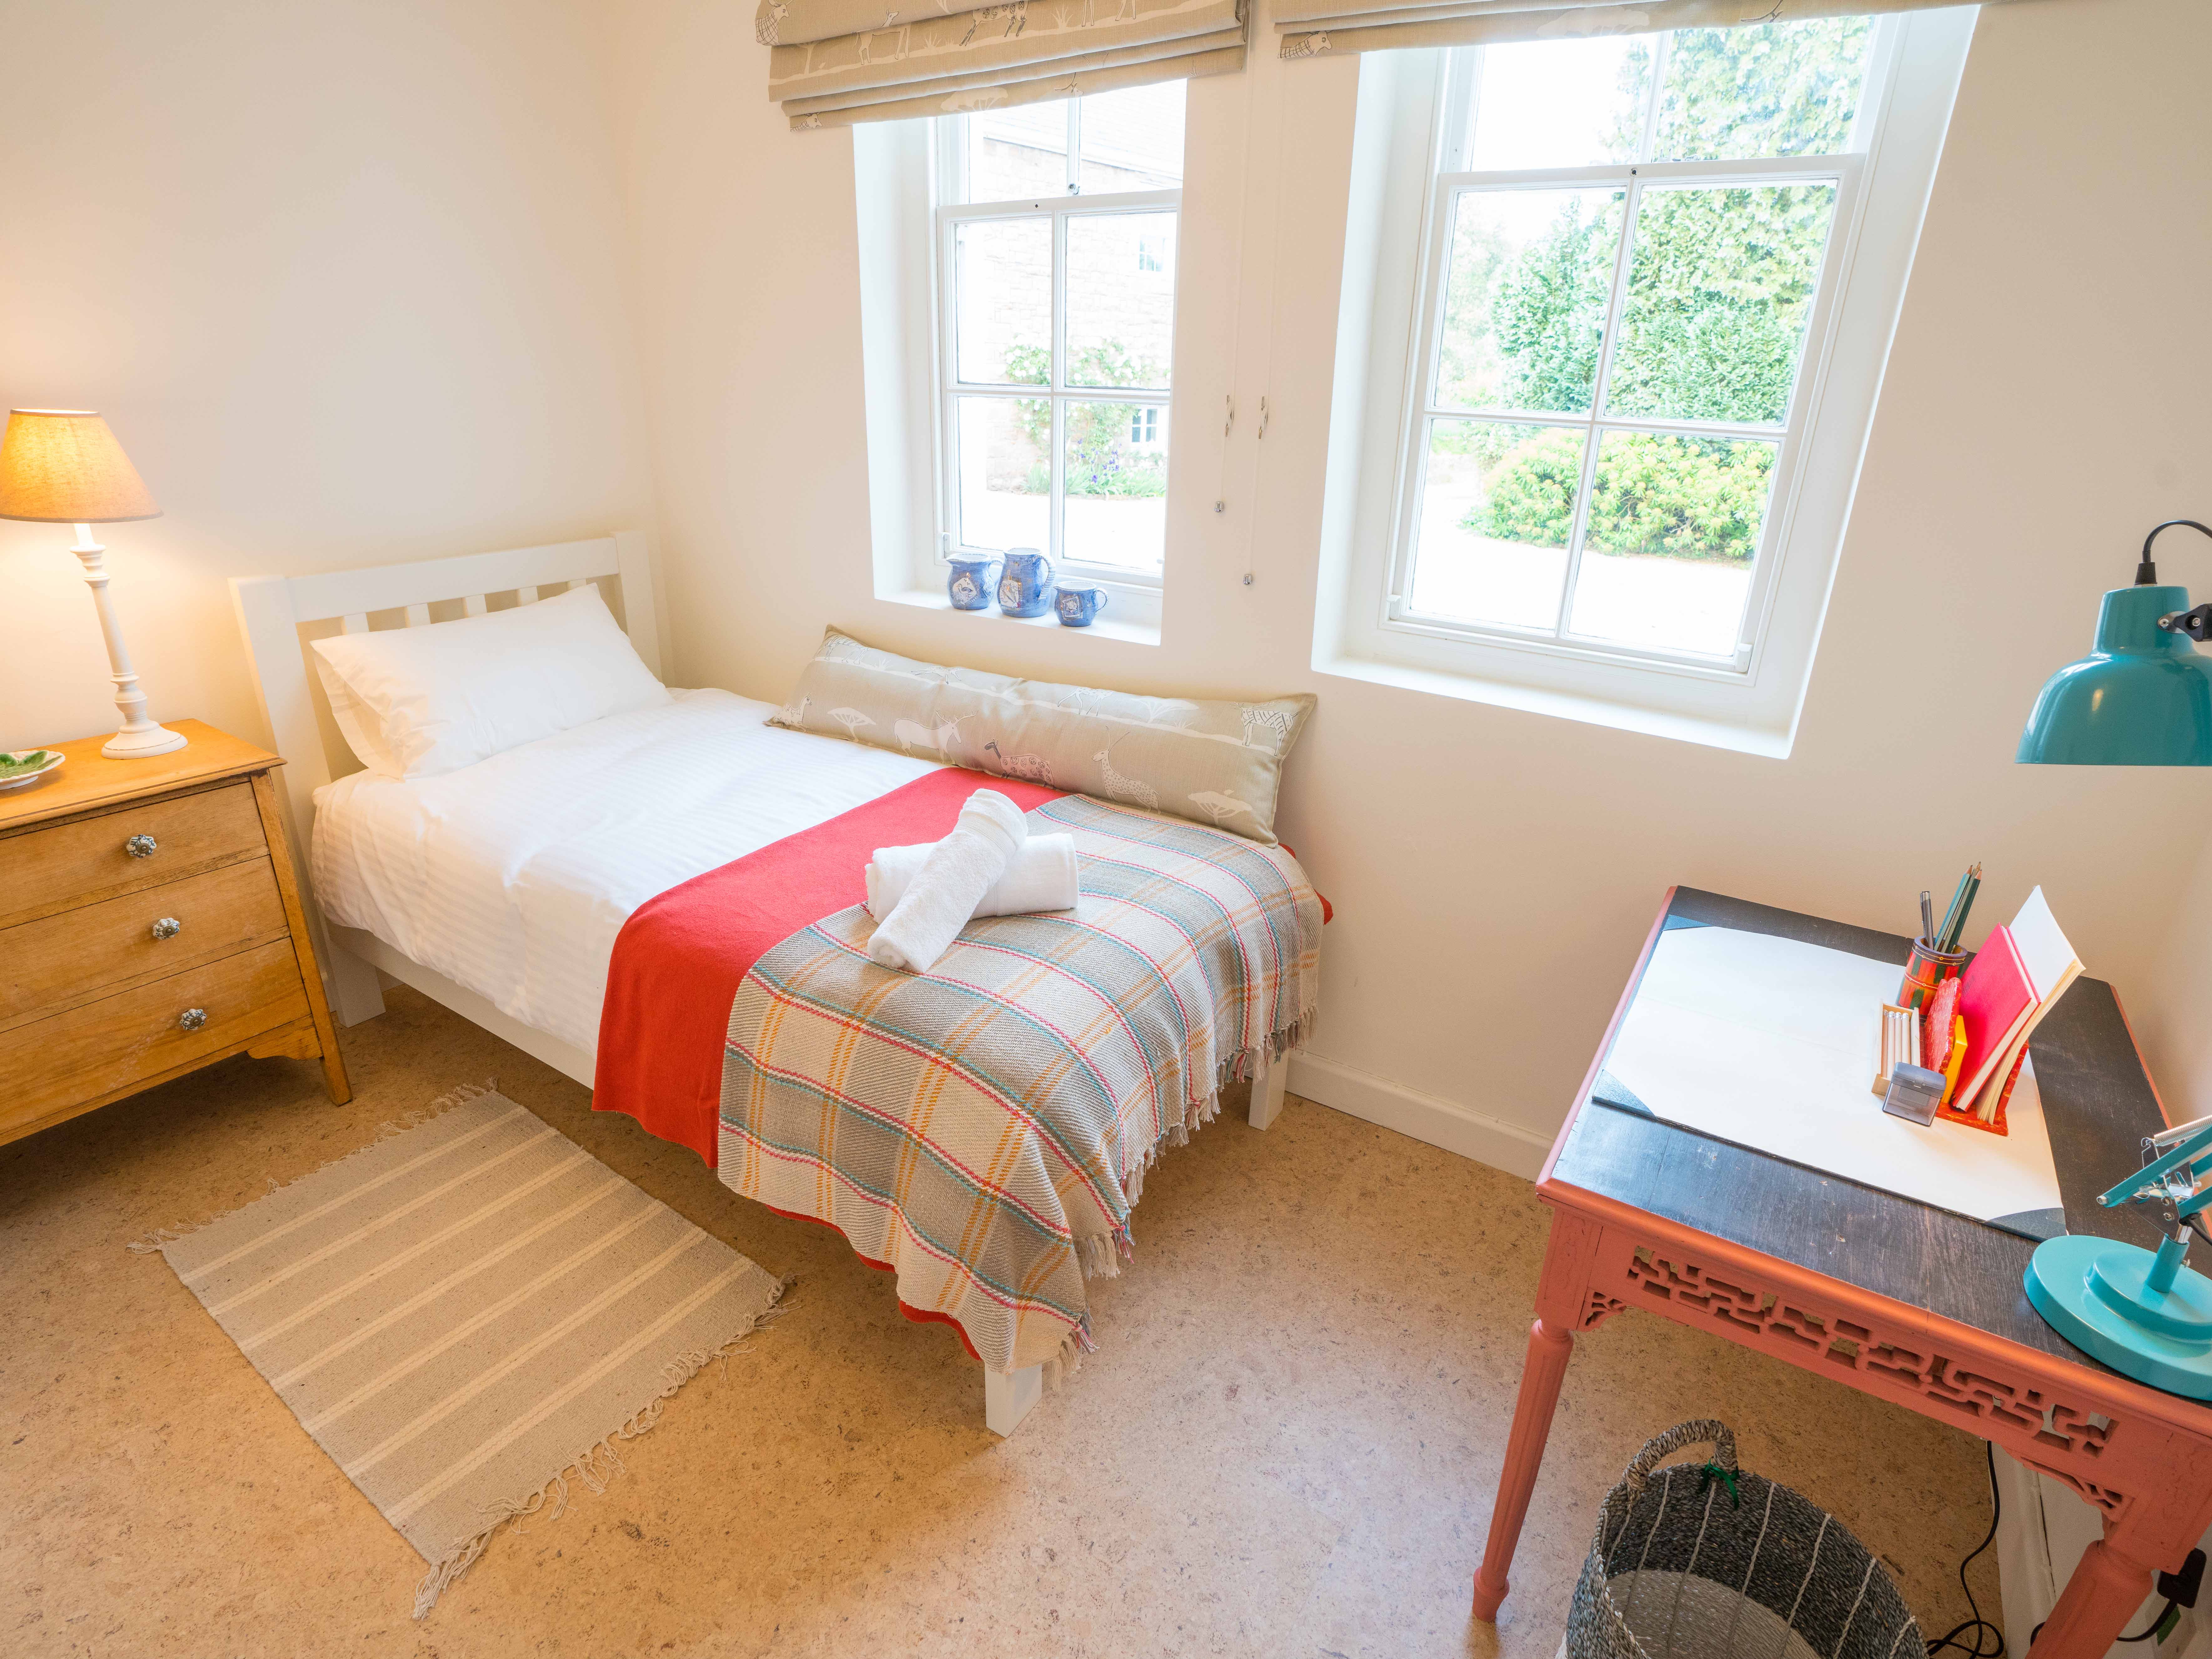 Ground floor single bedroom - this room would share the bathroom facilities upstairs